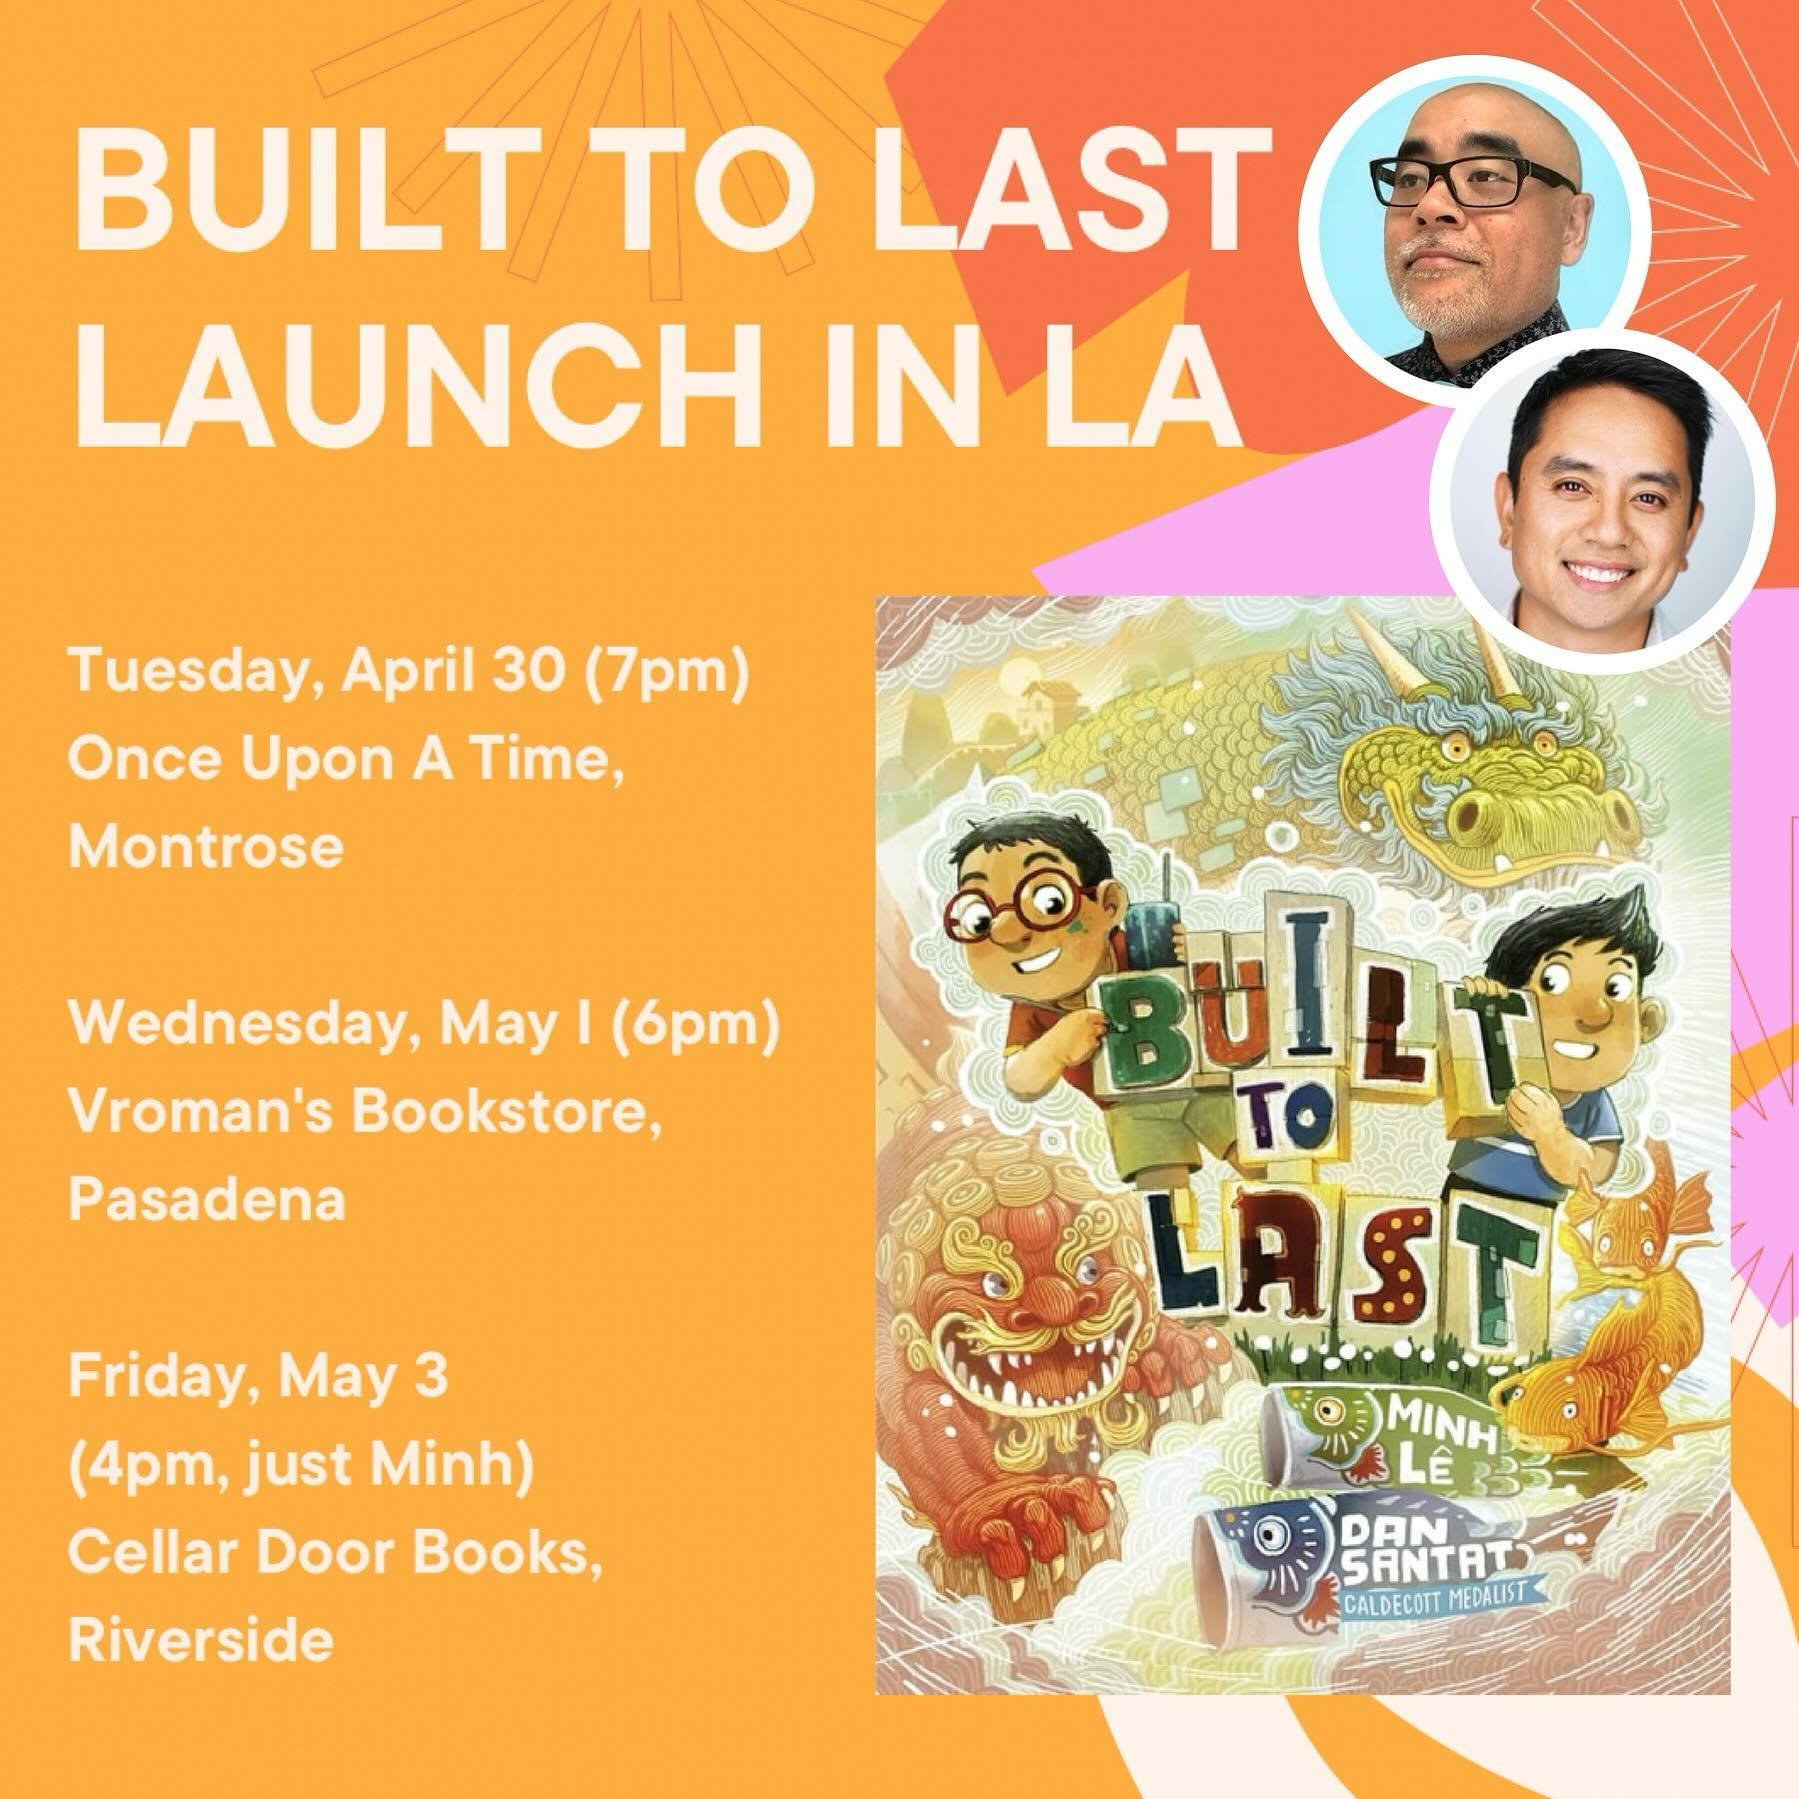 ☀️ Starting tomorrow, @dsantat &amp; I will be in the LA area to launch BUILT TO LAST, our 4th book together. Come join us at @onceuponatimebkstore, @vromansbookstore, and @cellardoorbookstore! @knopfkids @randomhousekids